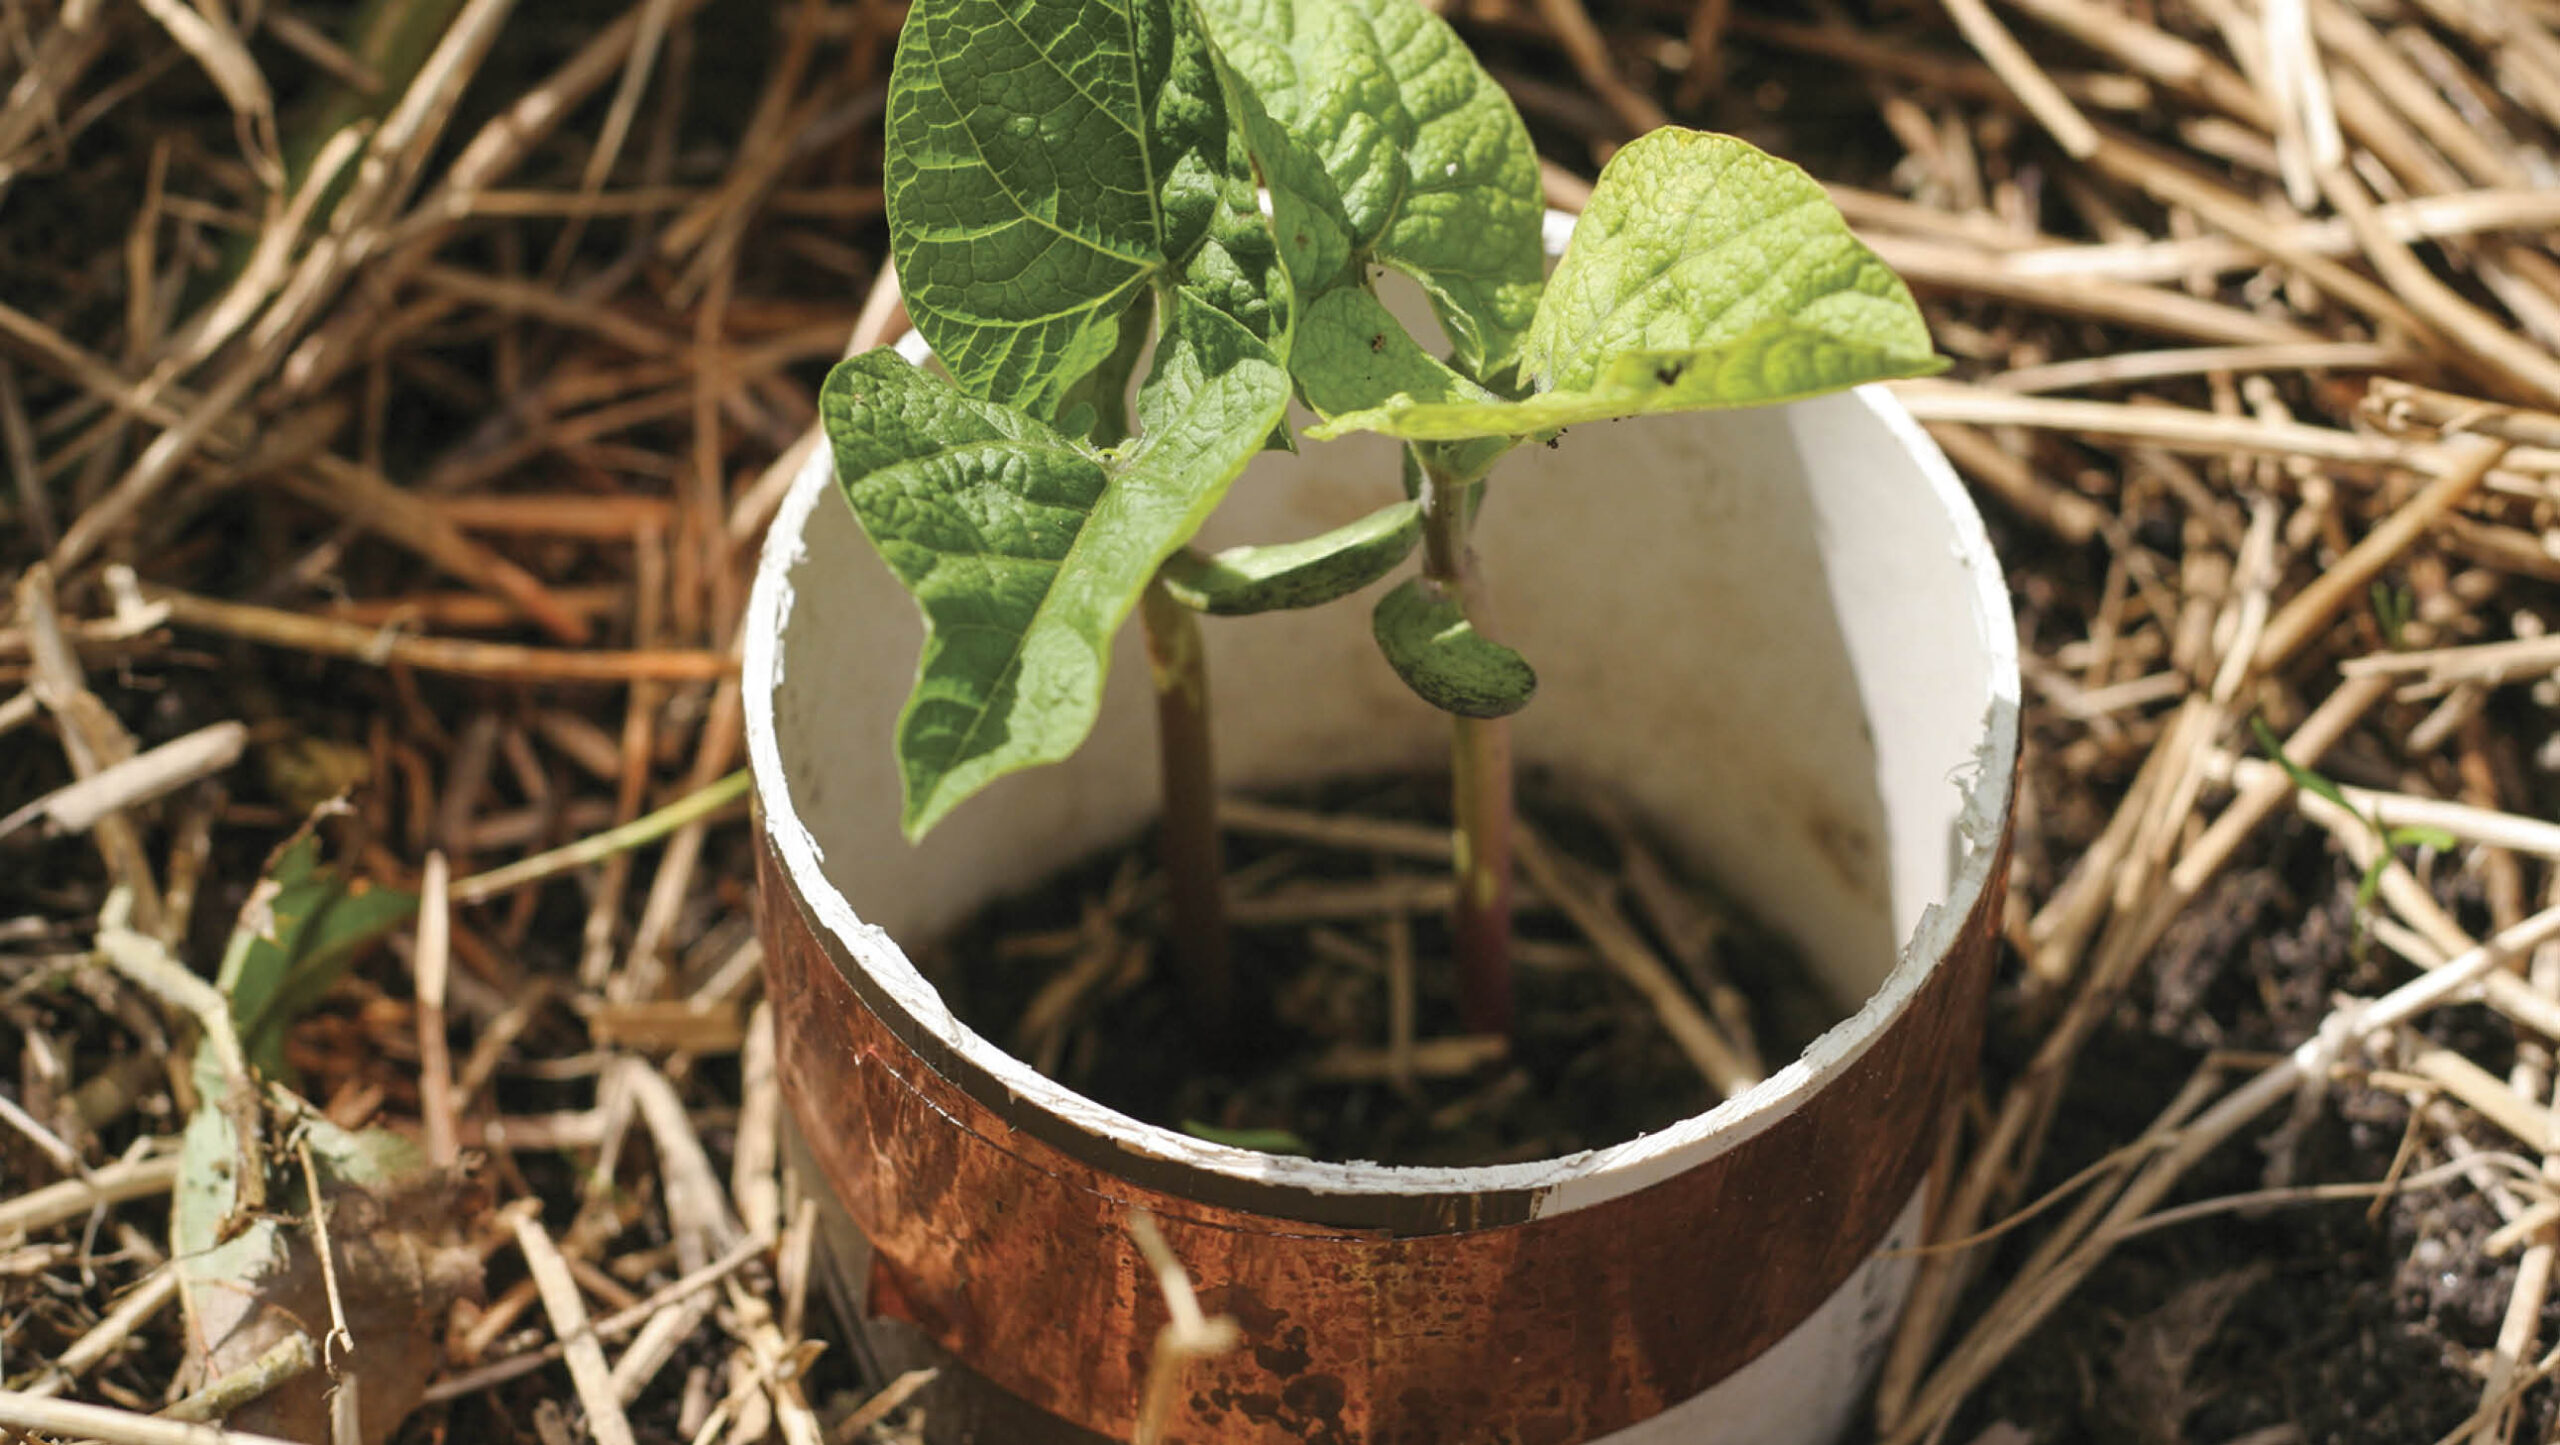 Collars can protect seedlings from pests.